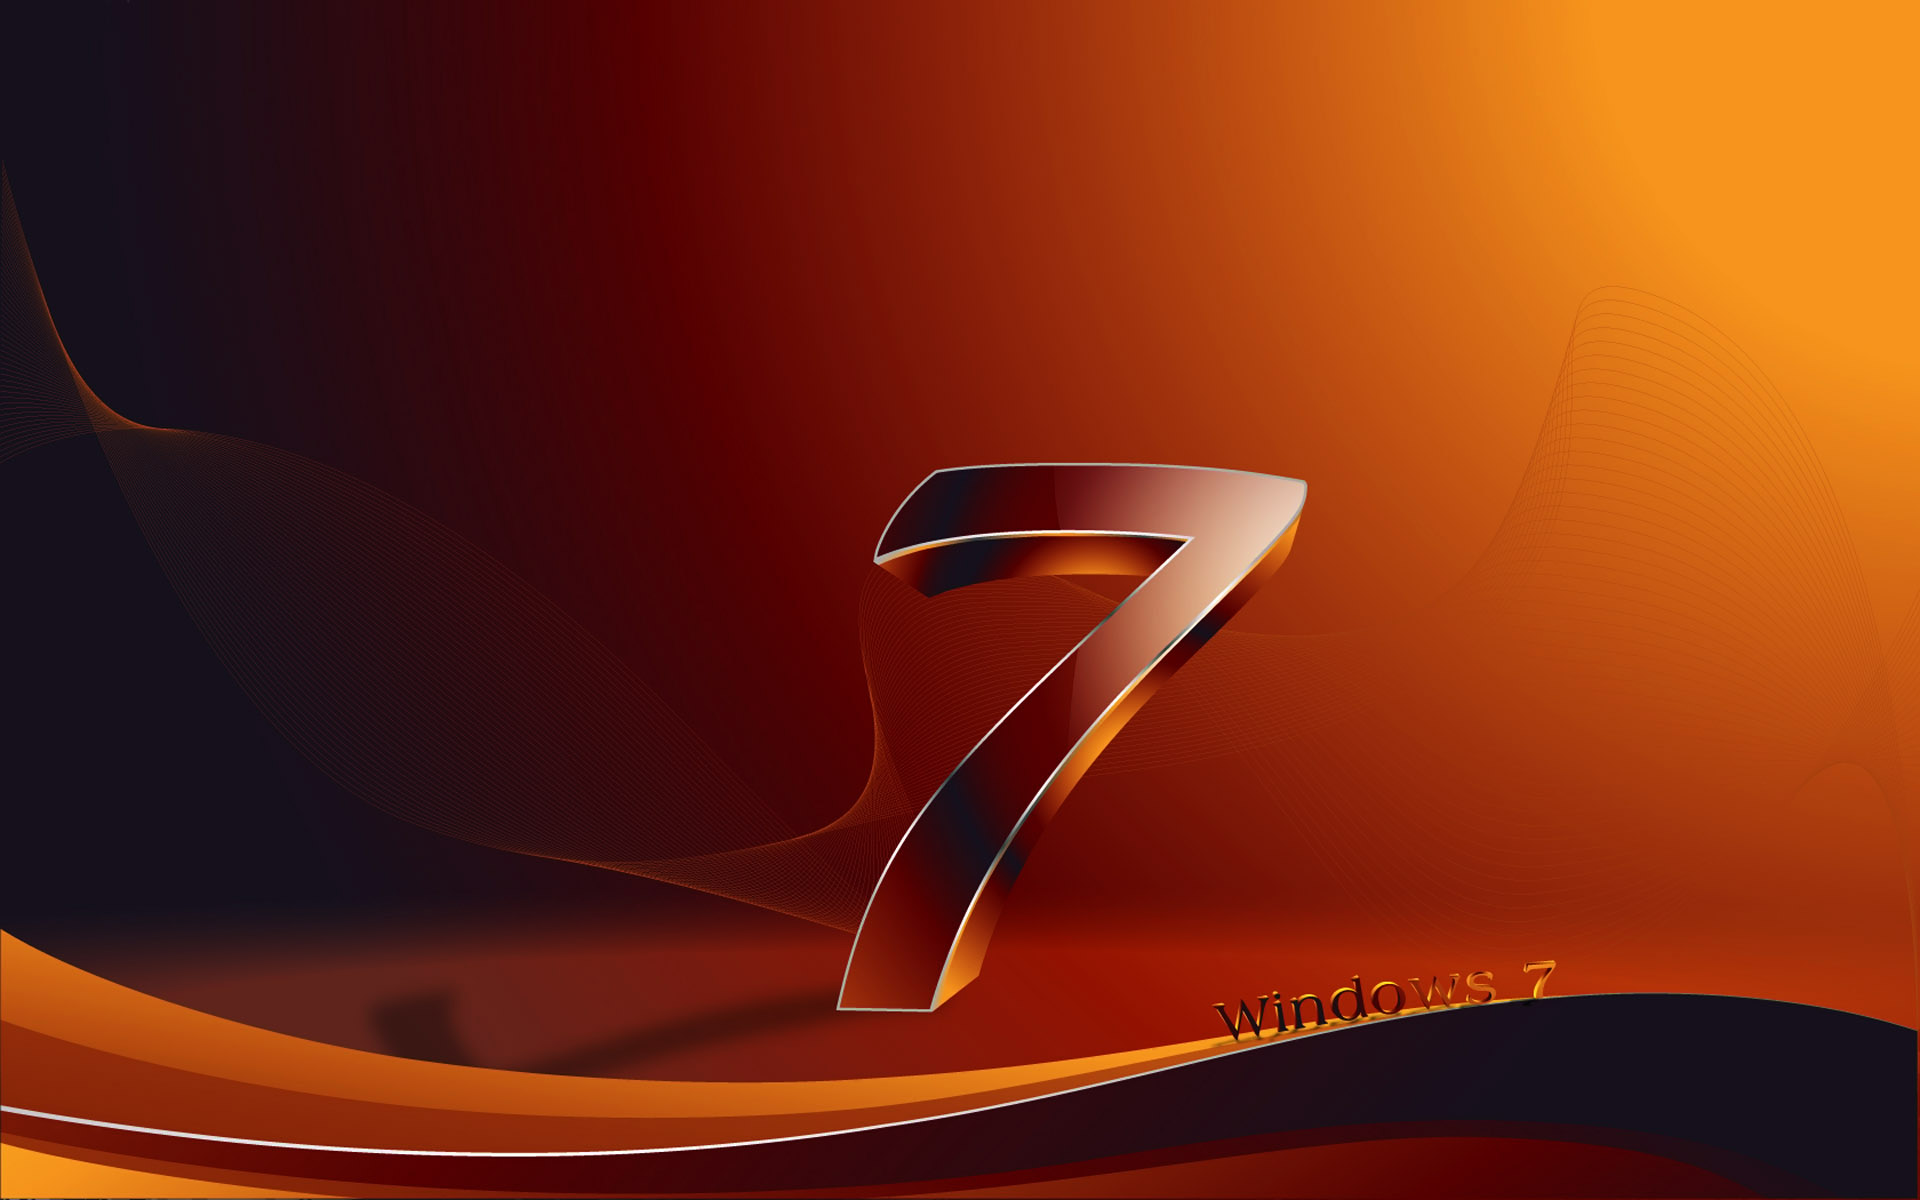 Free download 3D Windows 7 Wallpapers HD Wallpapers [1920x1200] for ...
